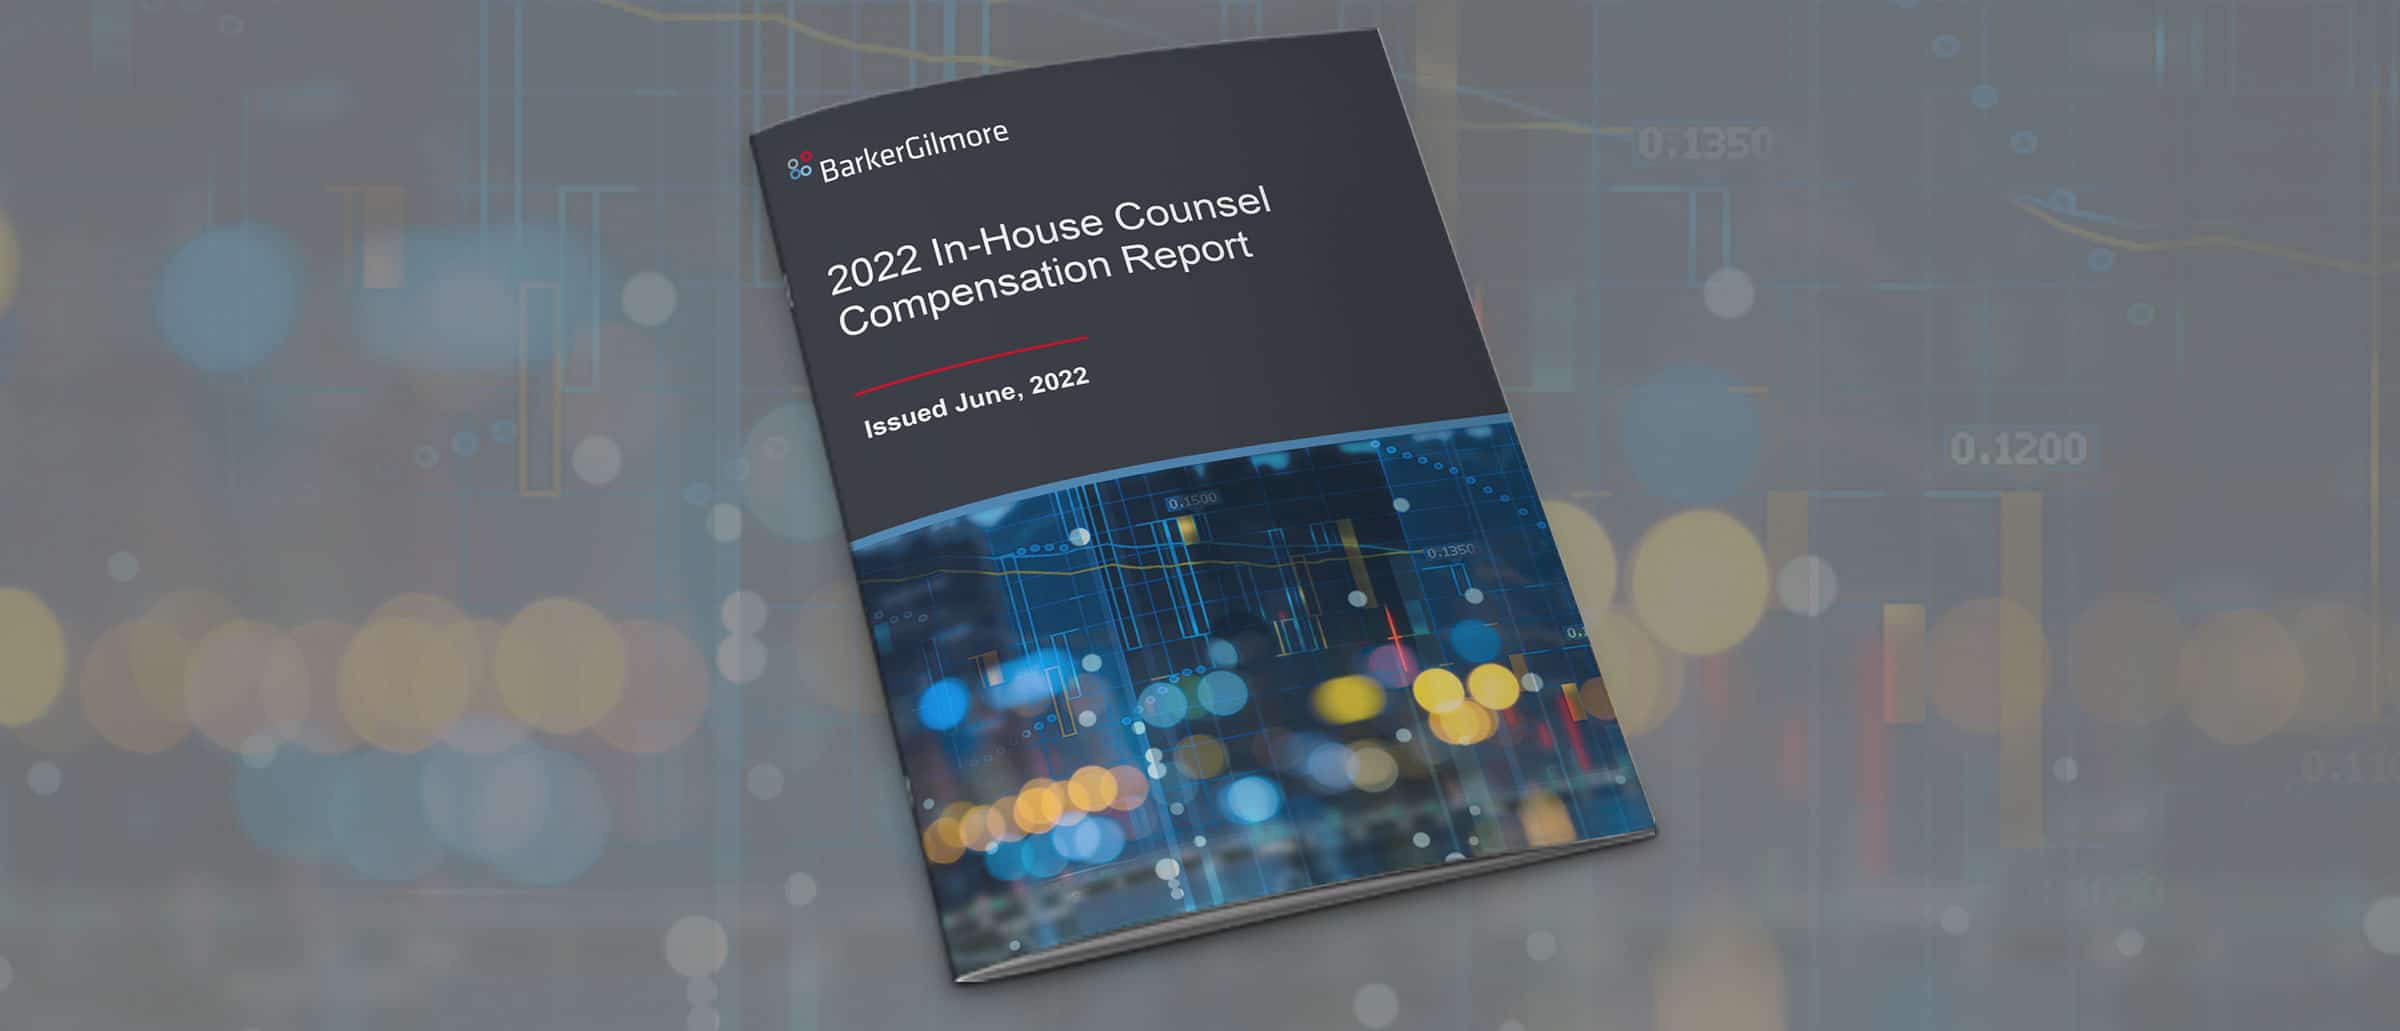 BarkerGilmore 2022 In-House Counsel Compensation Report